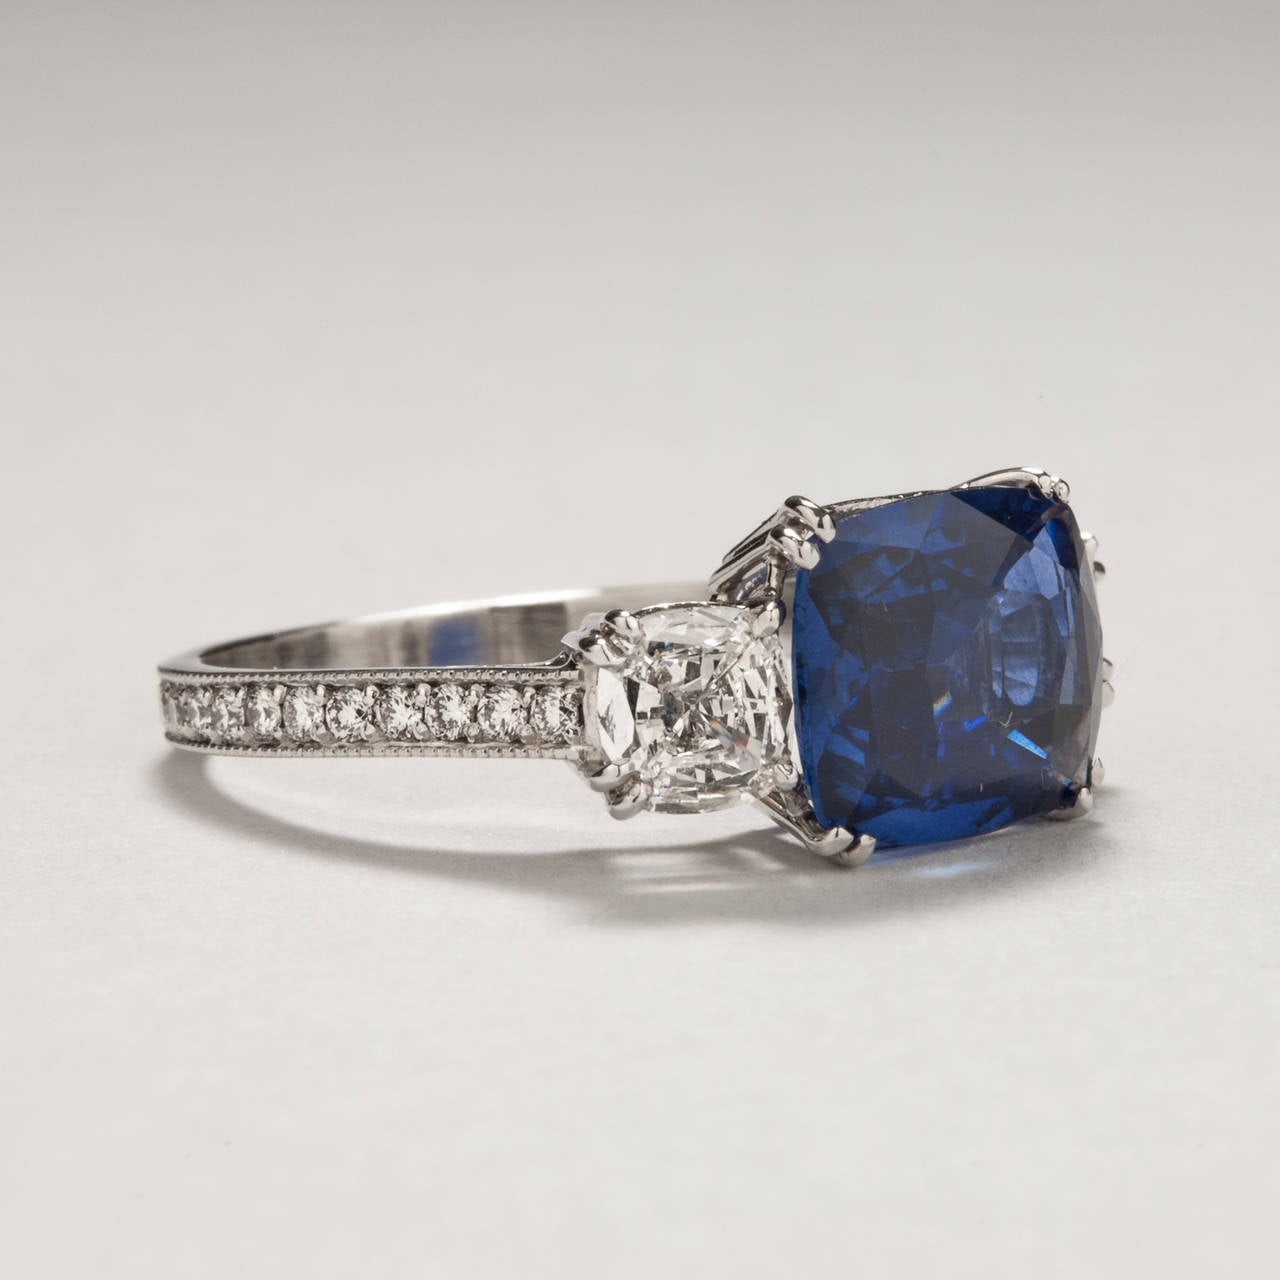 Simple and sophisticated, this platinum estate ring focuses attention on the highly desirable medium blue sapphire at its center which weighs 3.12 carats. Two lovely custom cut diamonds, totaling .60 carats, accentuate the sapphire on either side